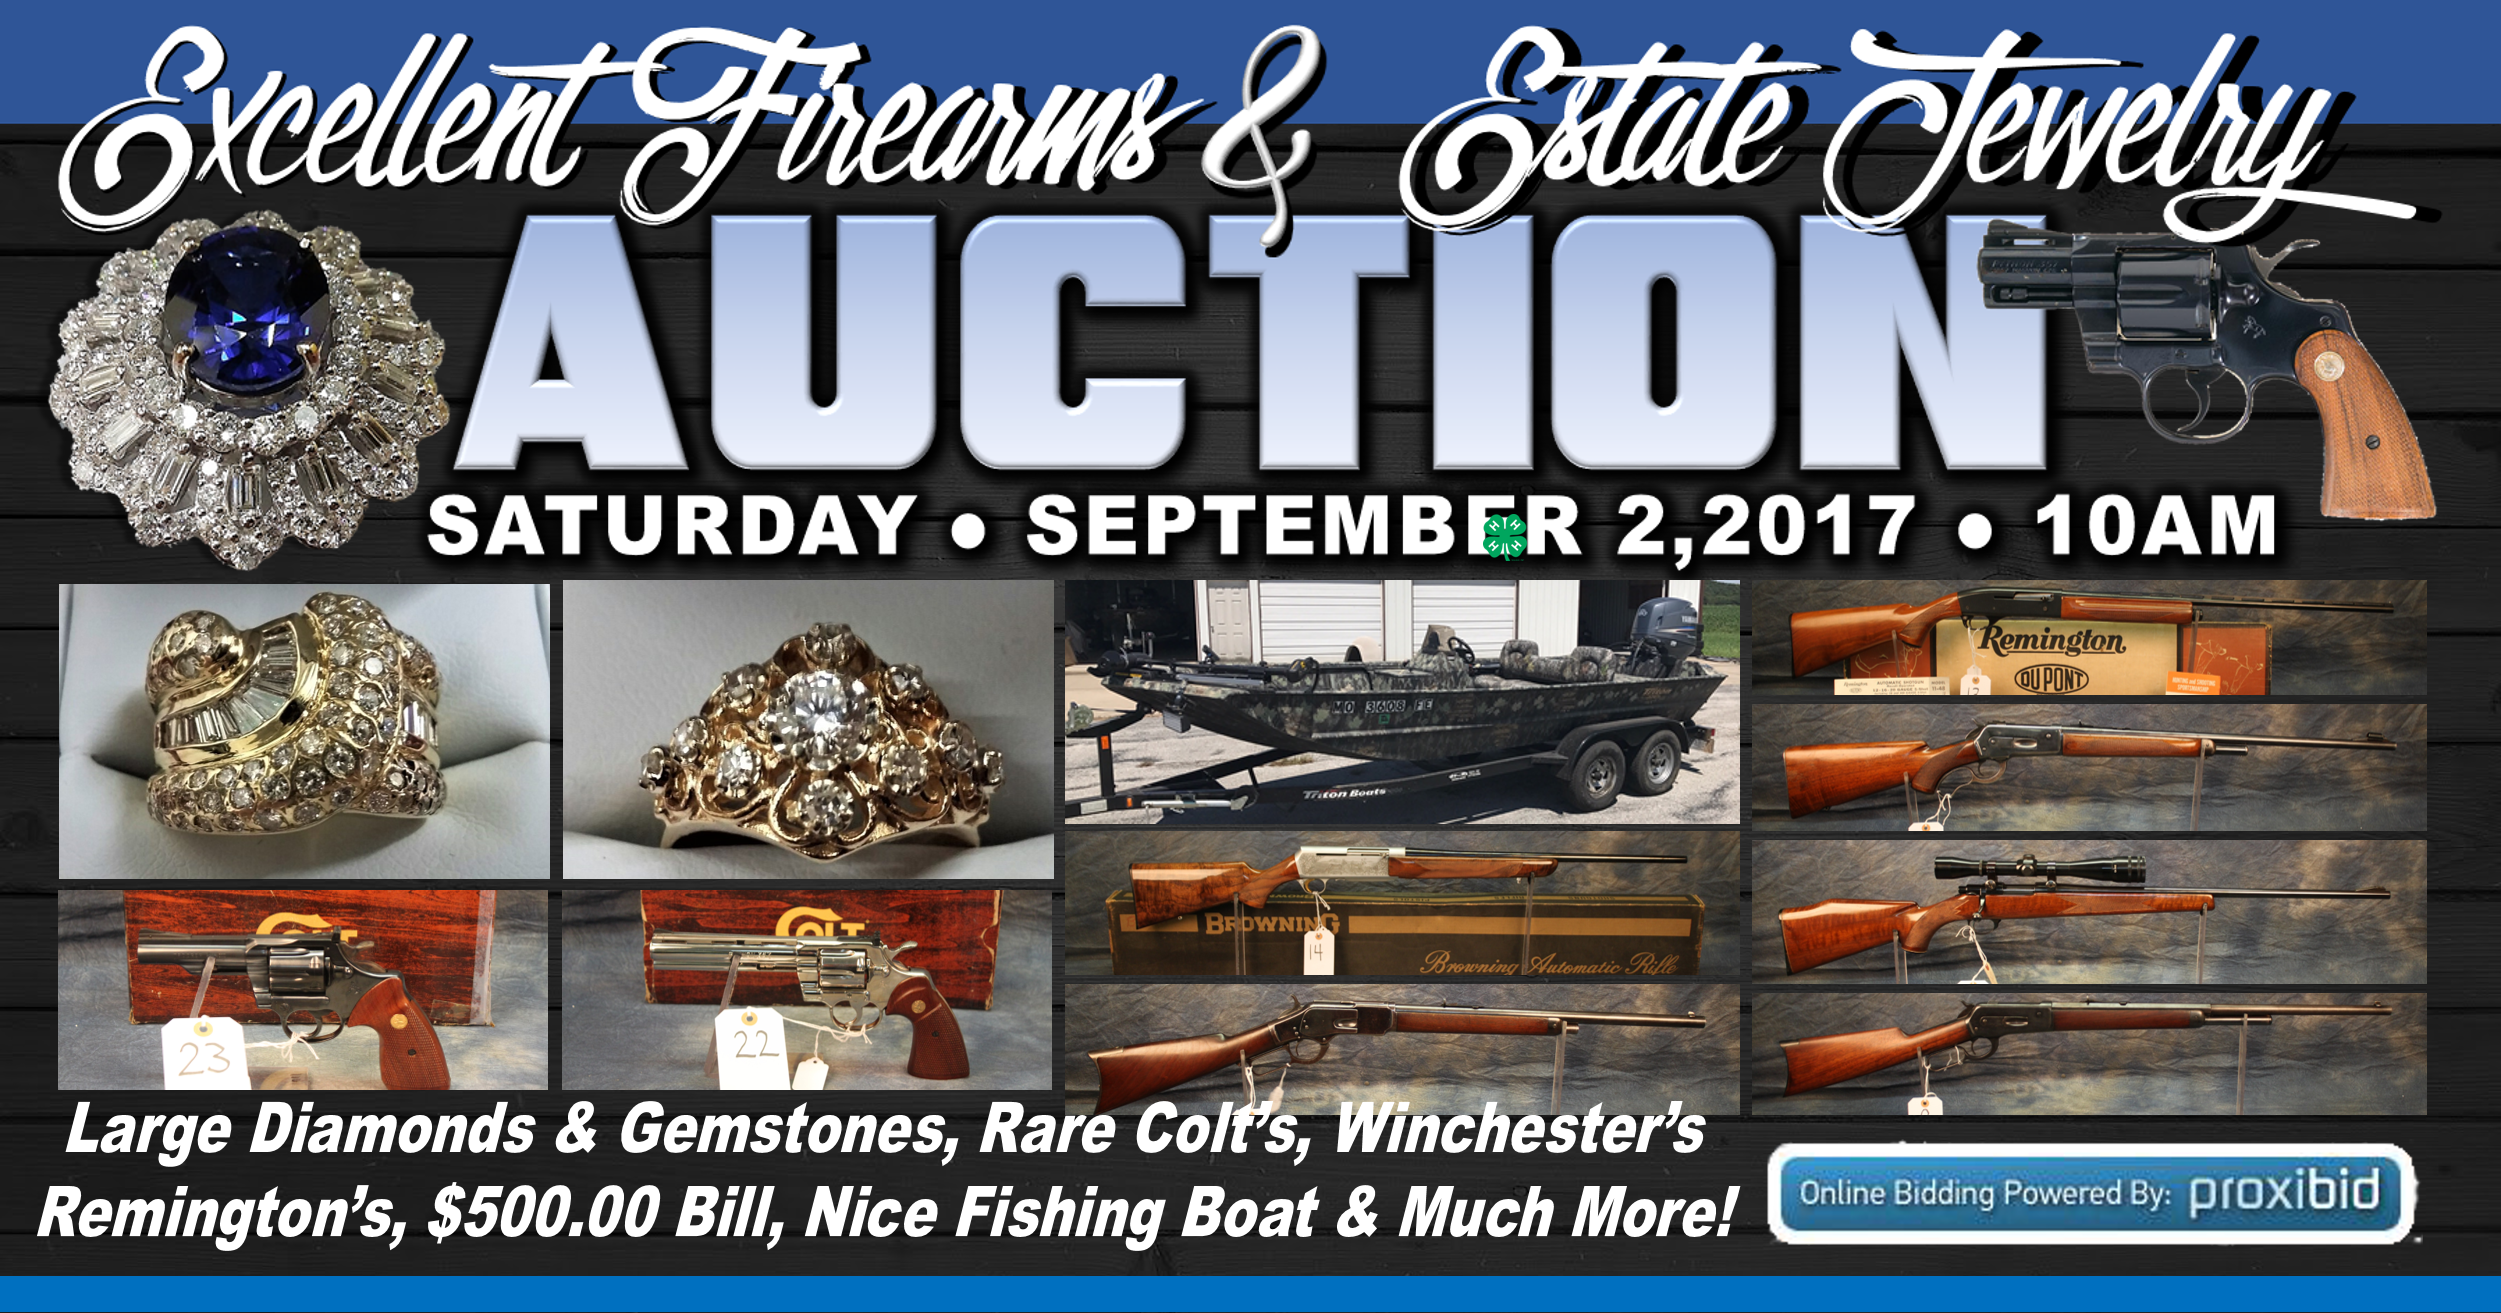 EXCELLENT FIREARM & JEWELRY AUCTION